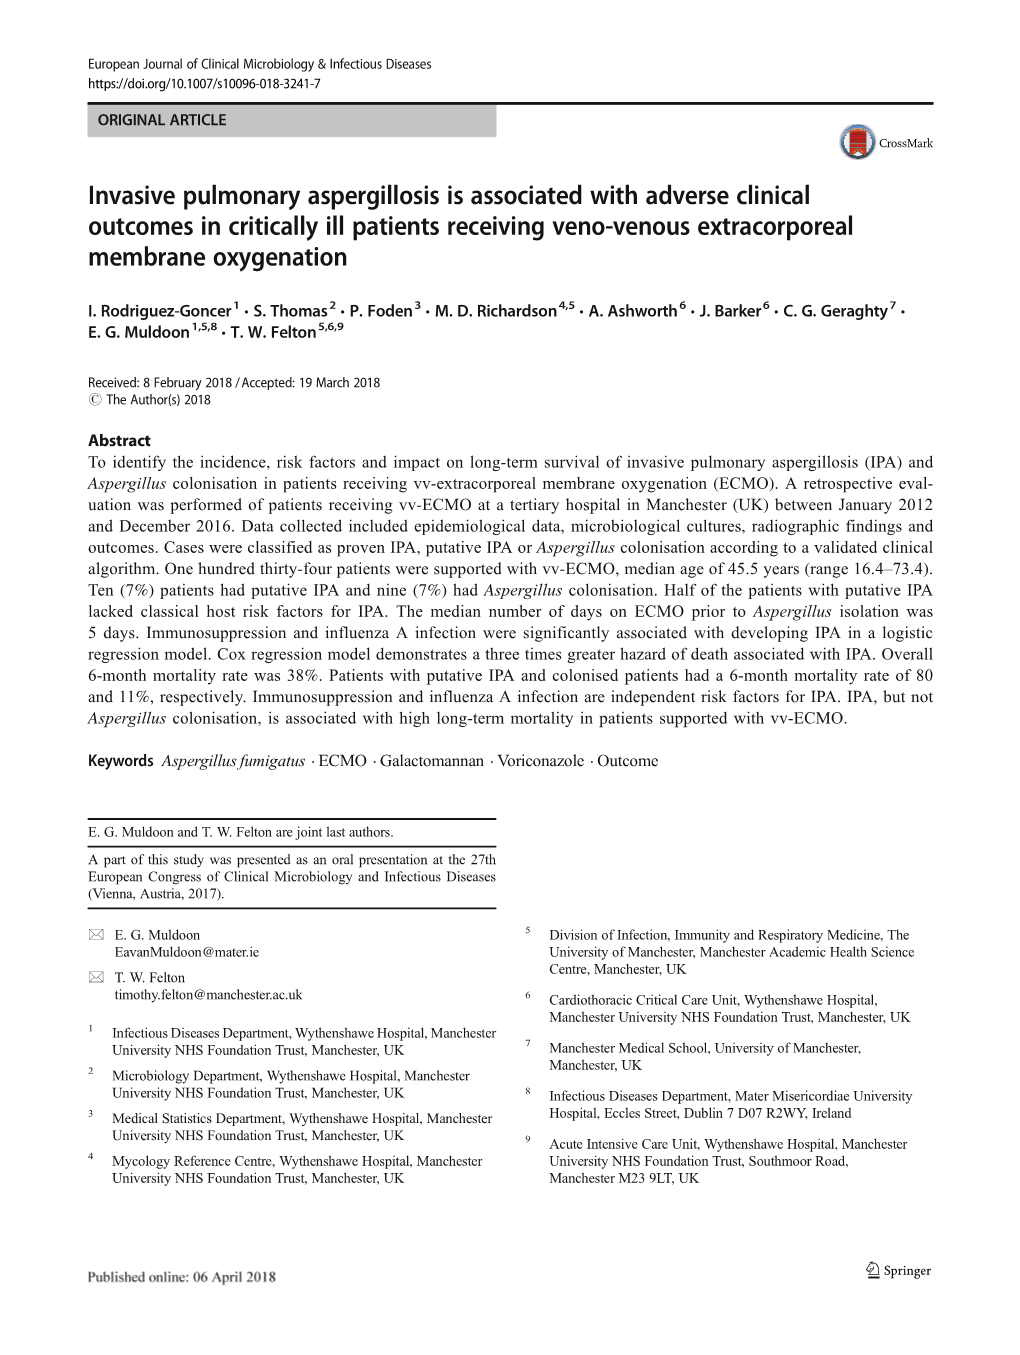 Invasive Pulmonary Aspergillosis Is Associated with Adverse Clinical Outcomes in Critically Ill Patients Receiving Veno-Venous Extracorporeal Membrane Oxygenation